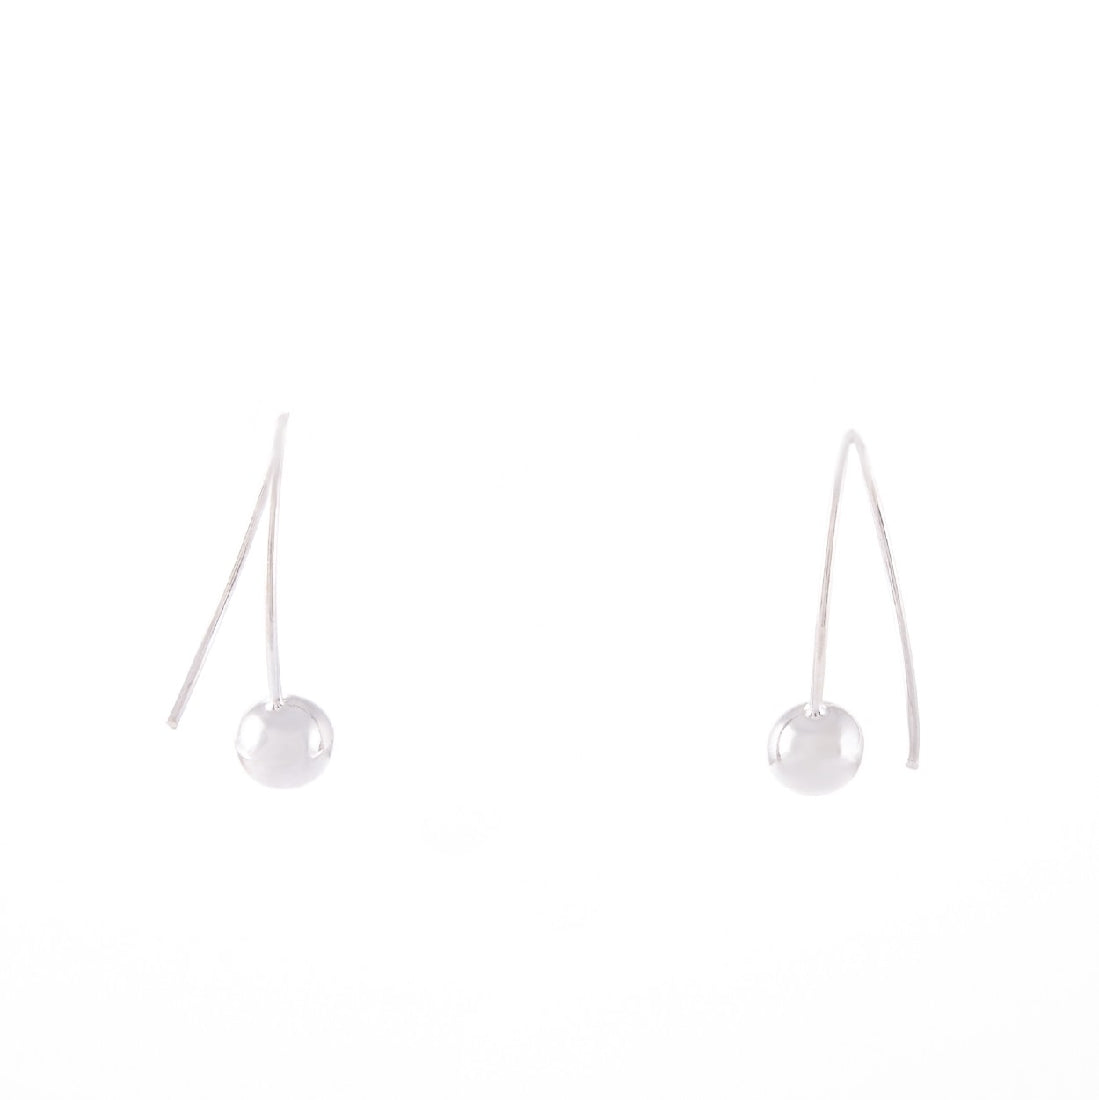 Who's Charlie 6mm Sterling Silver Ball Drop Earrings